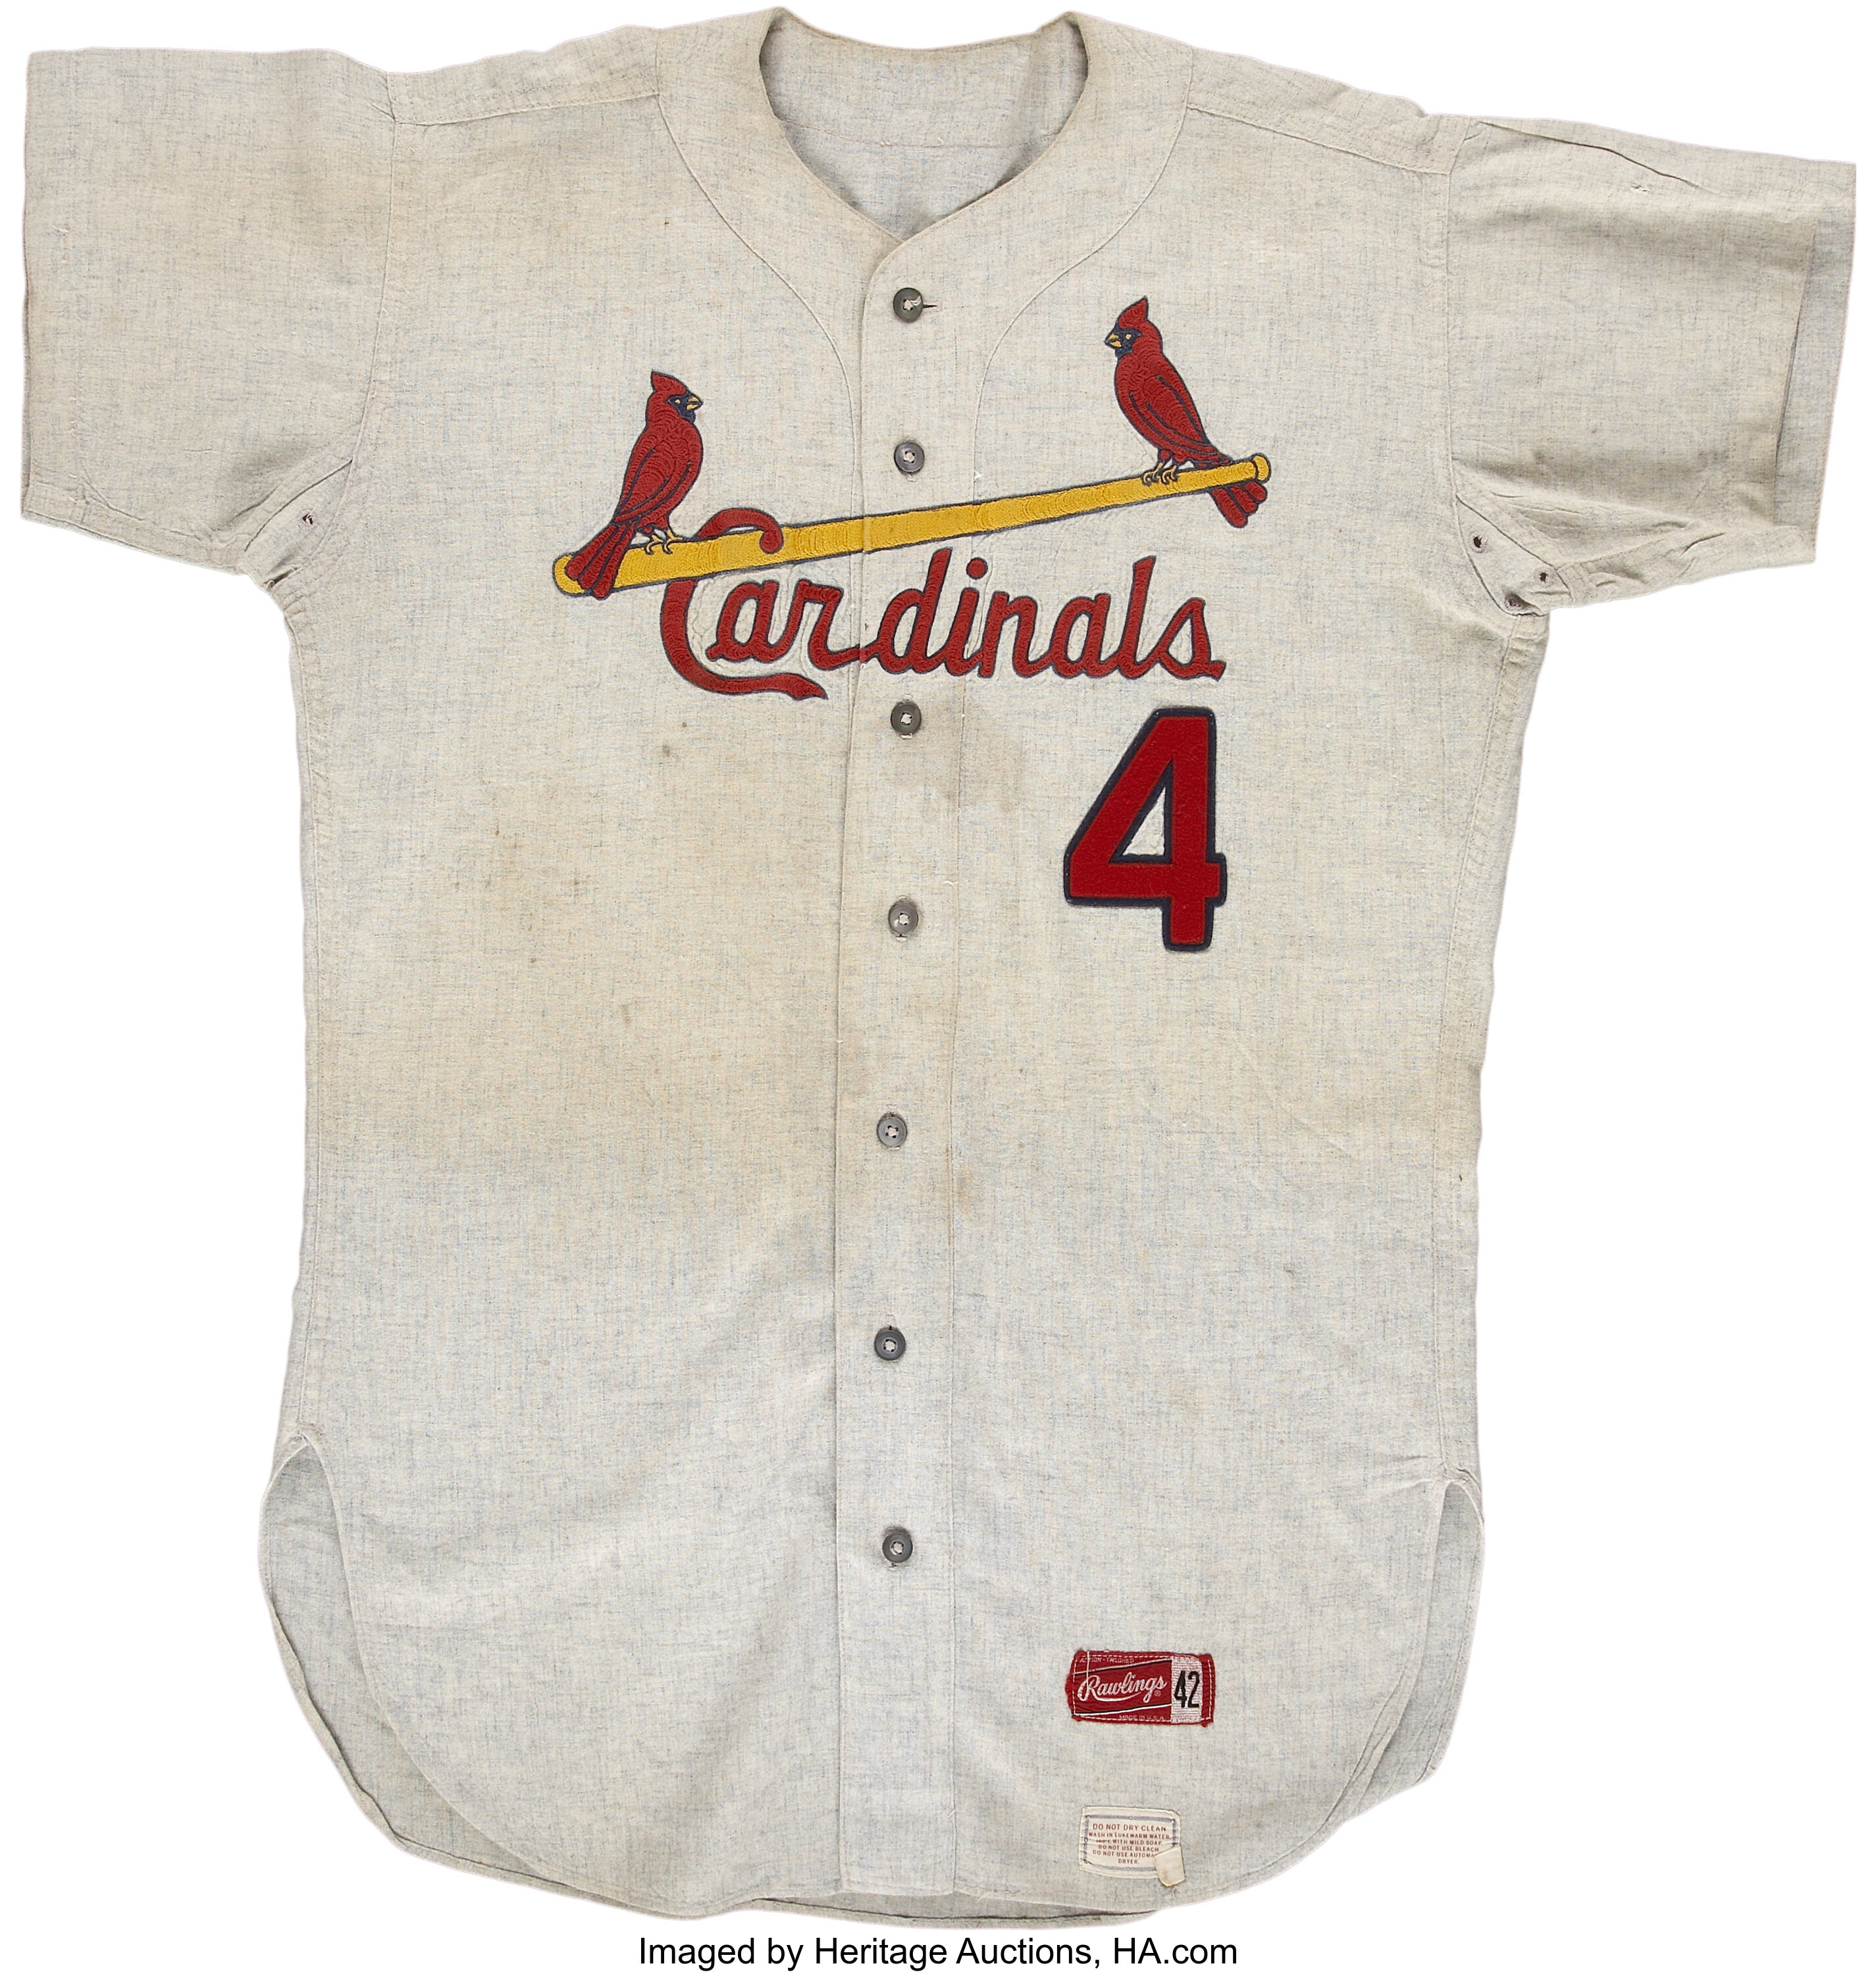 1968 St. Louis Cardinals Game Used Minor League Jersey